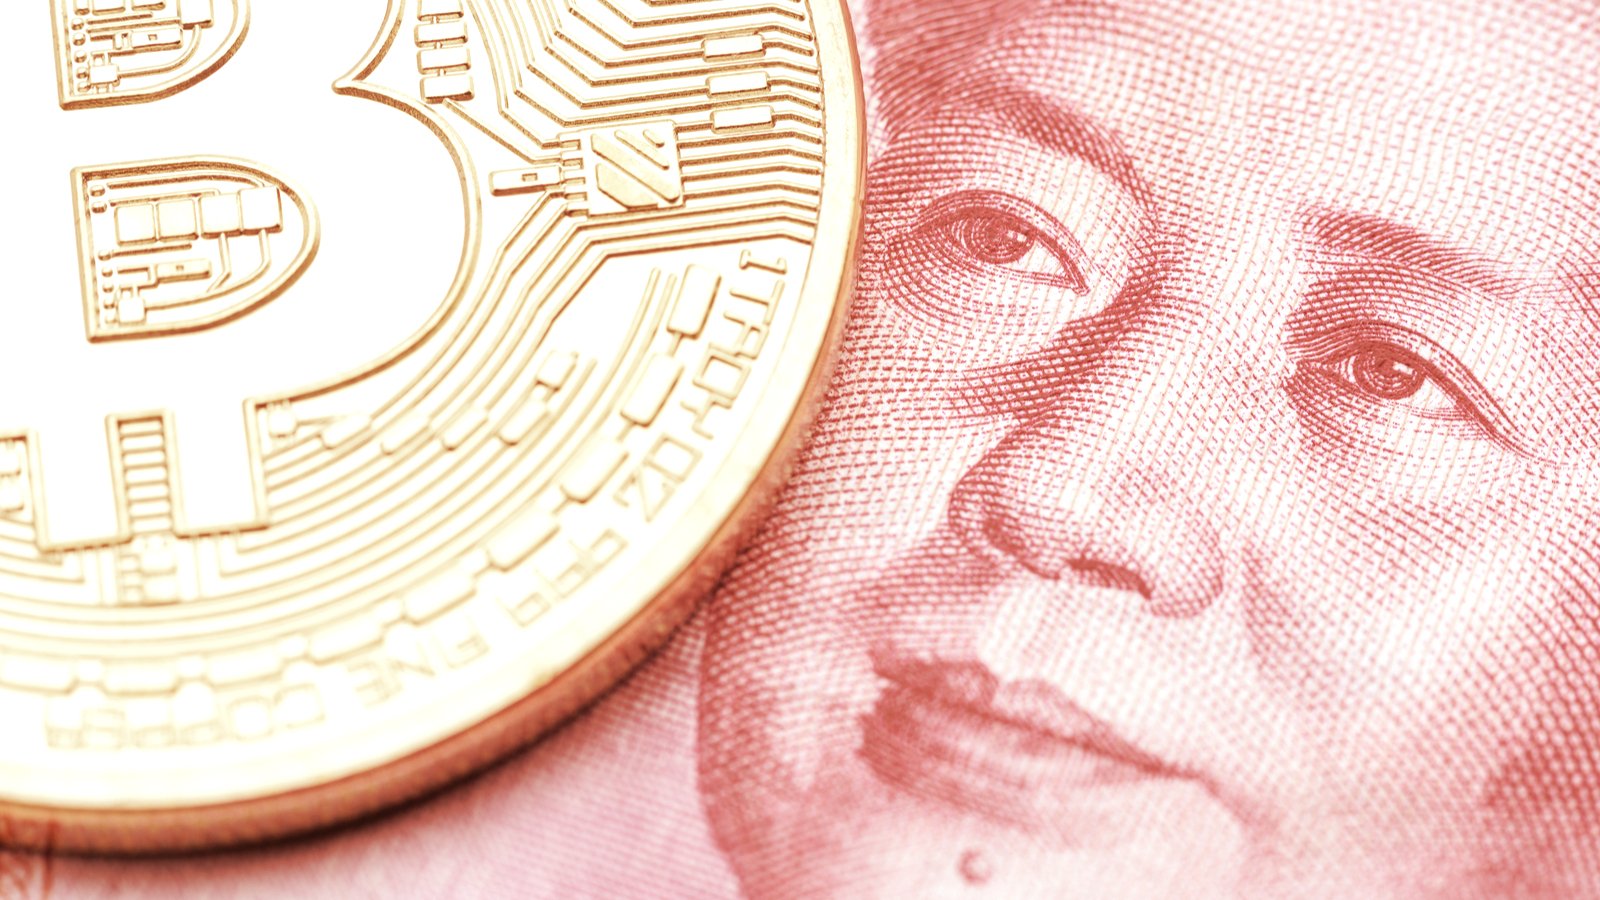 Crypto has been a popular asset class in China. Image: Shutterstock